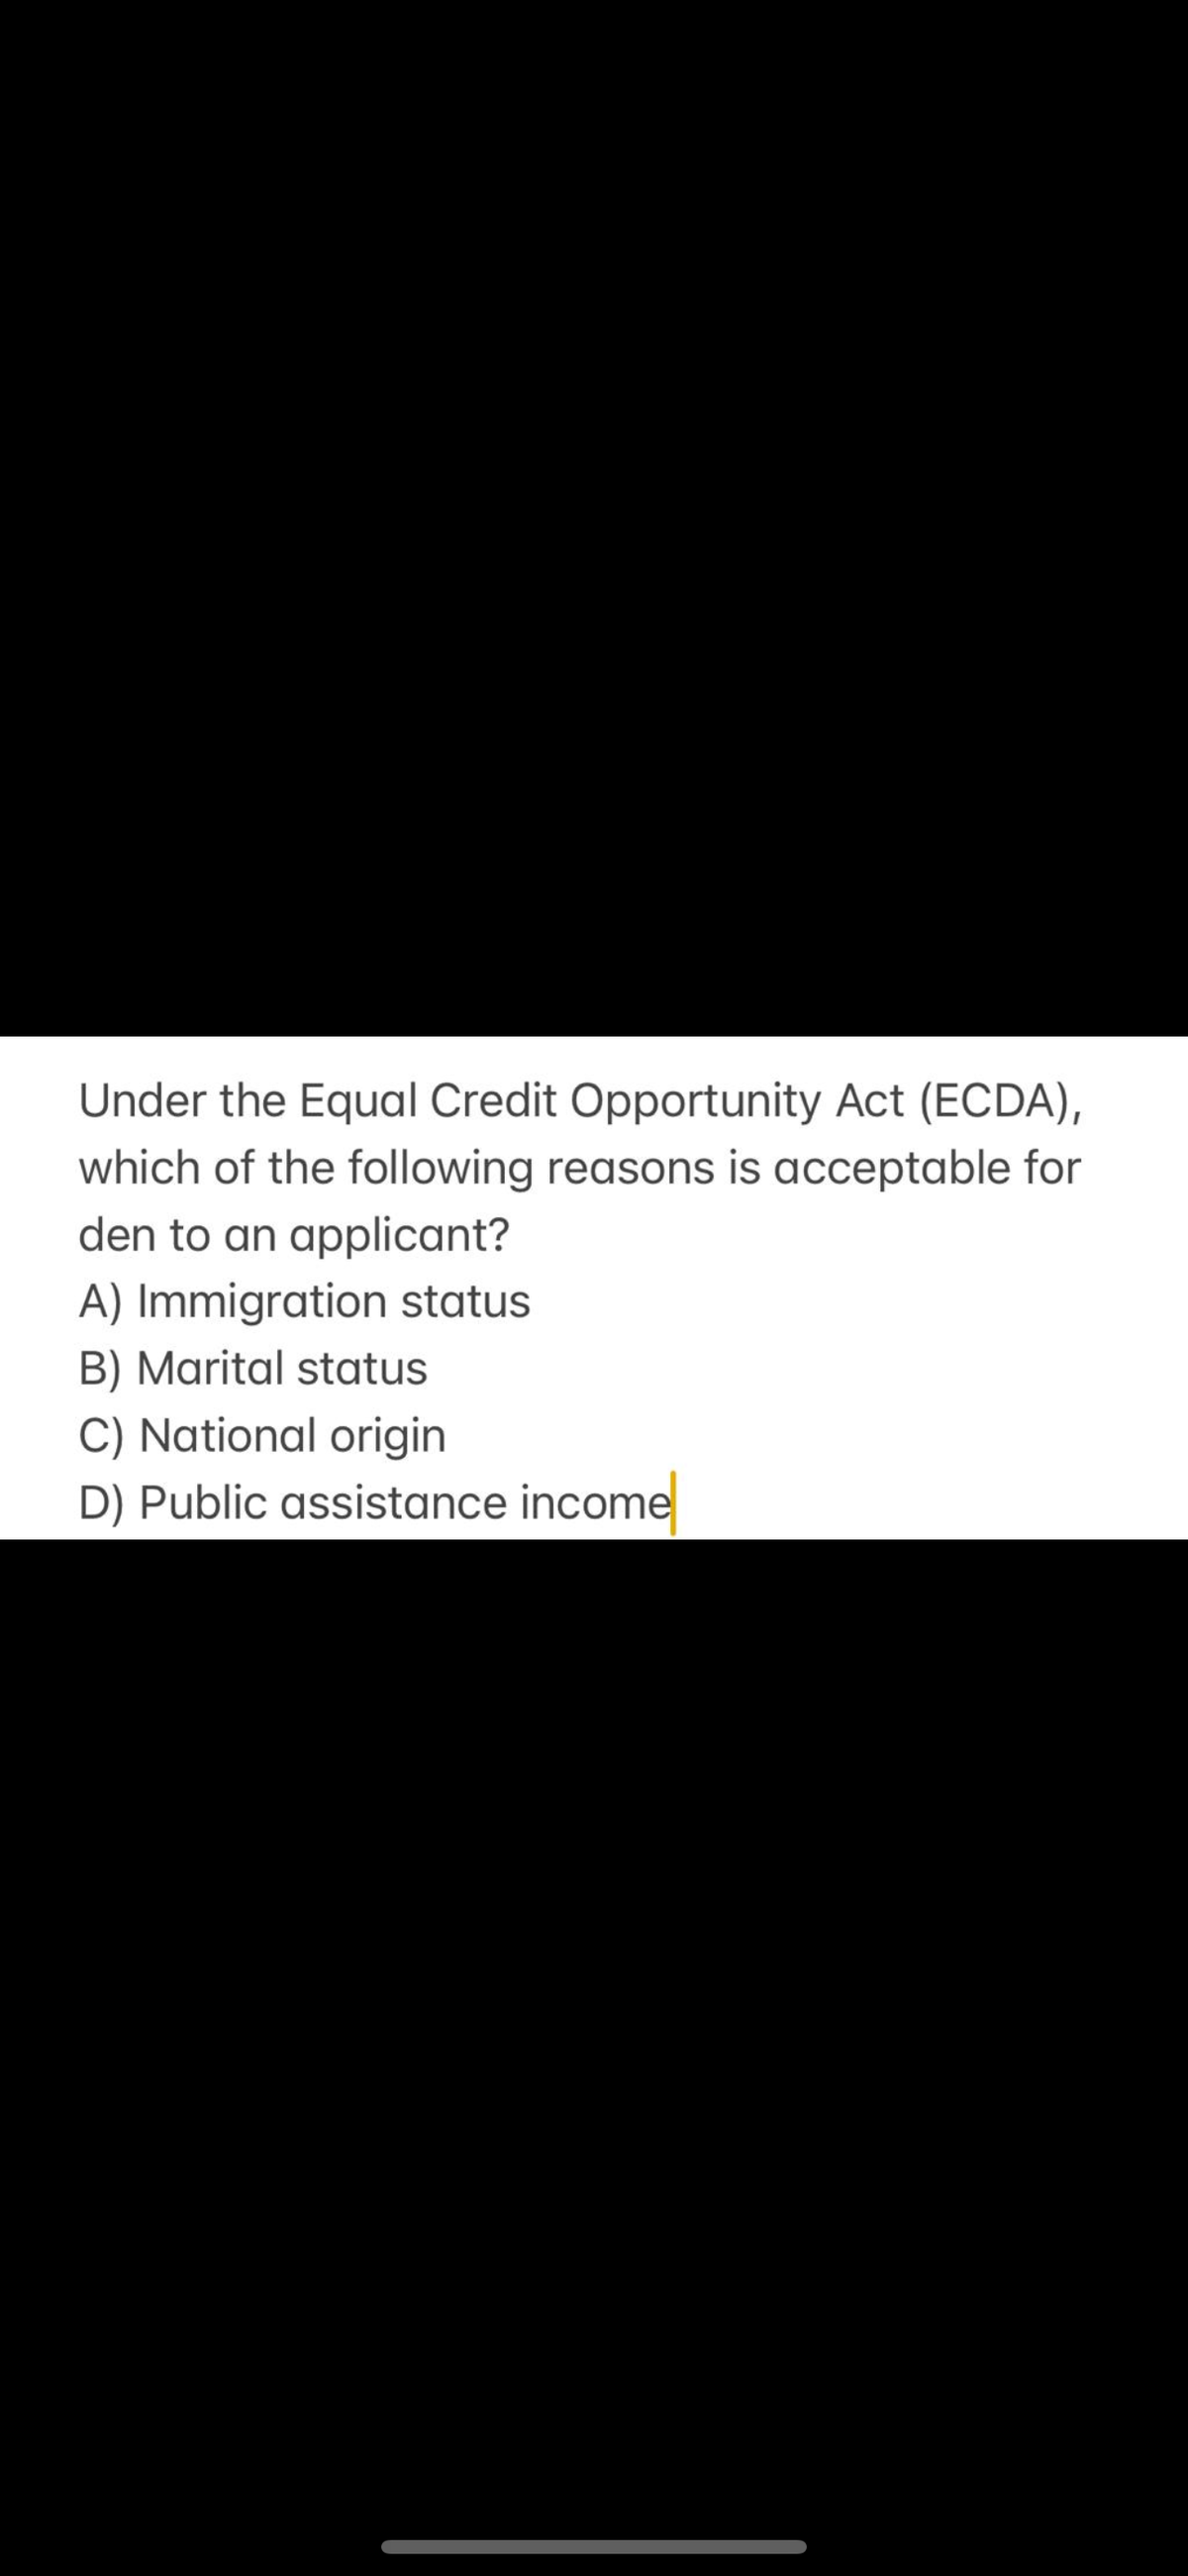 Under the Equal Credit Opportunity Act (ECDA),
which of the following reasons is acceptable for
den to an applicant?
A) Immigration status
B) Marital status
C) National origin
D) Public assistance income